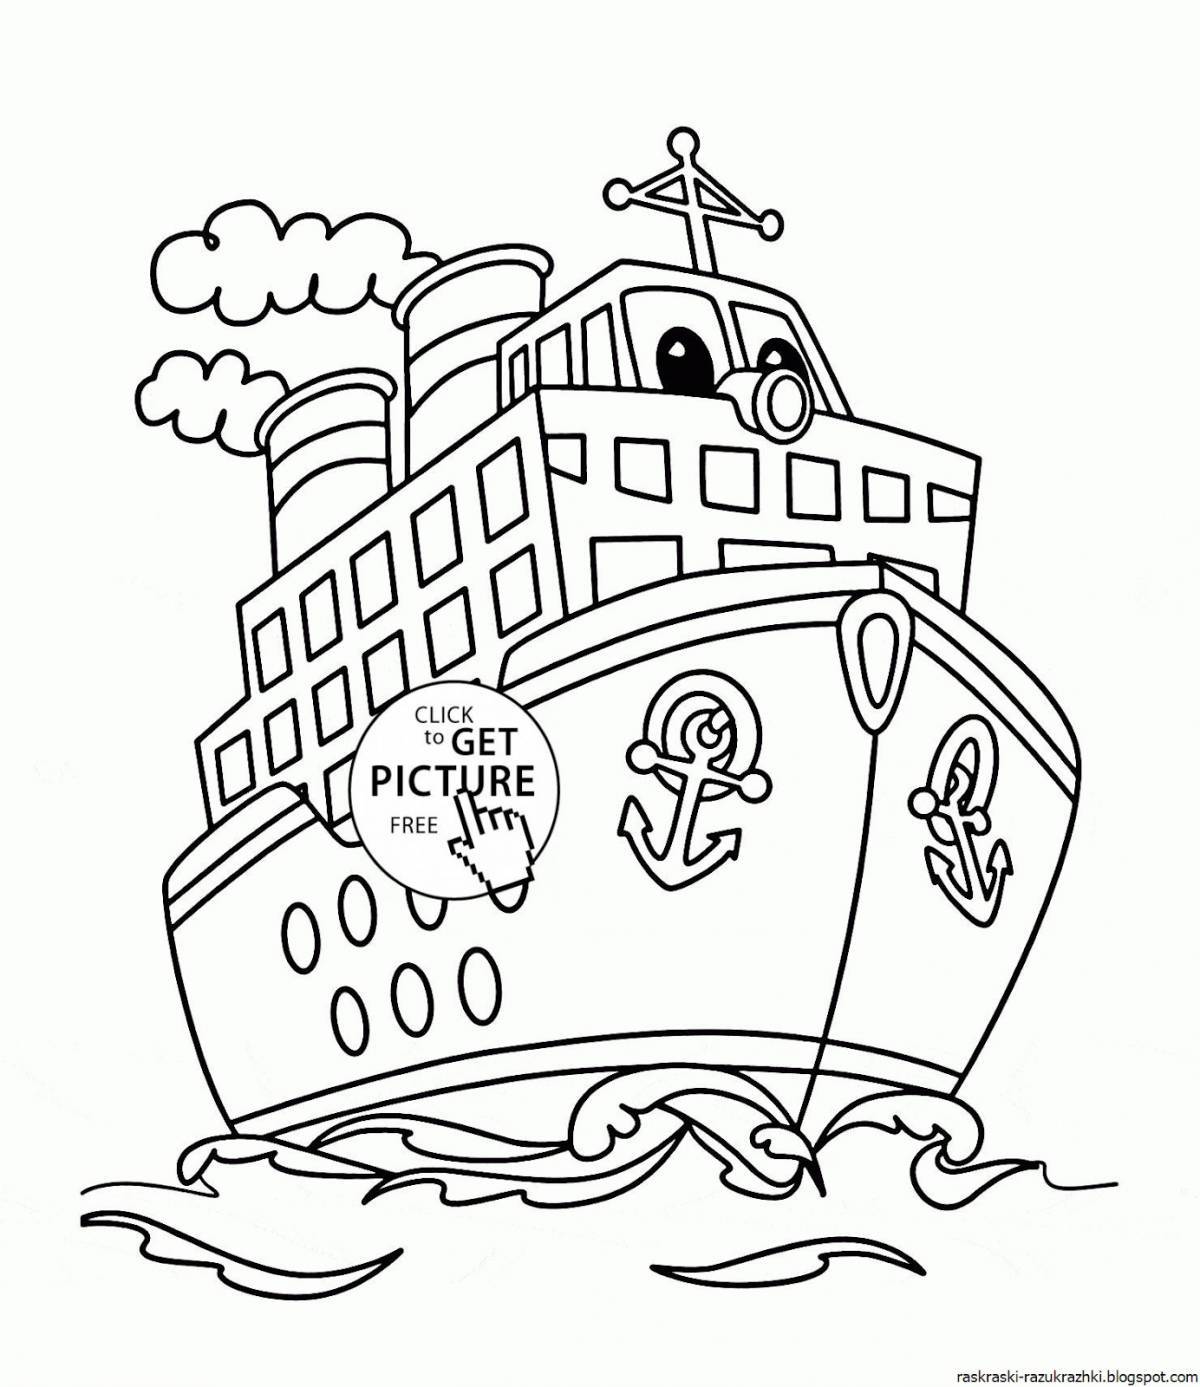 Majestic tug coloring page